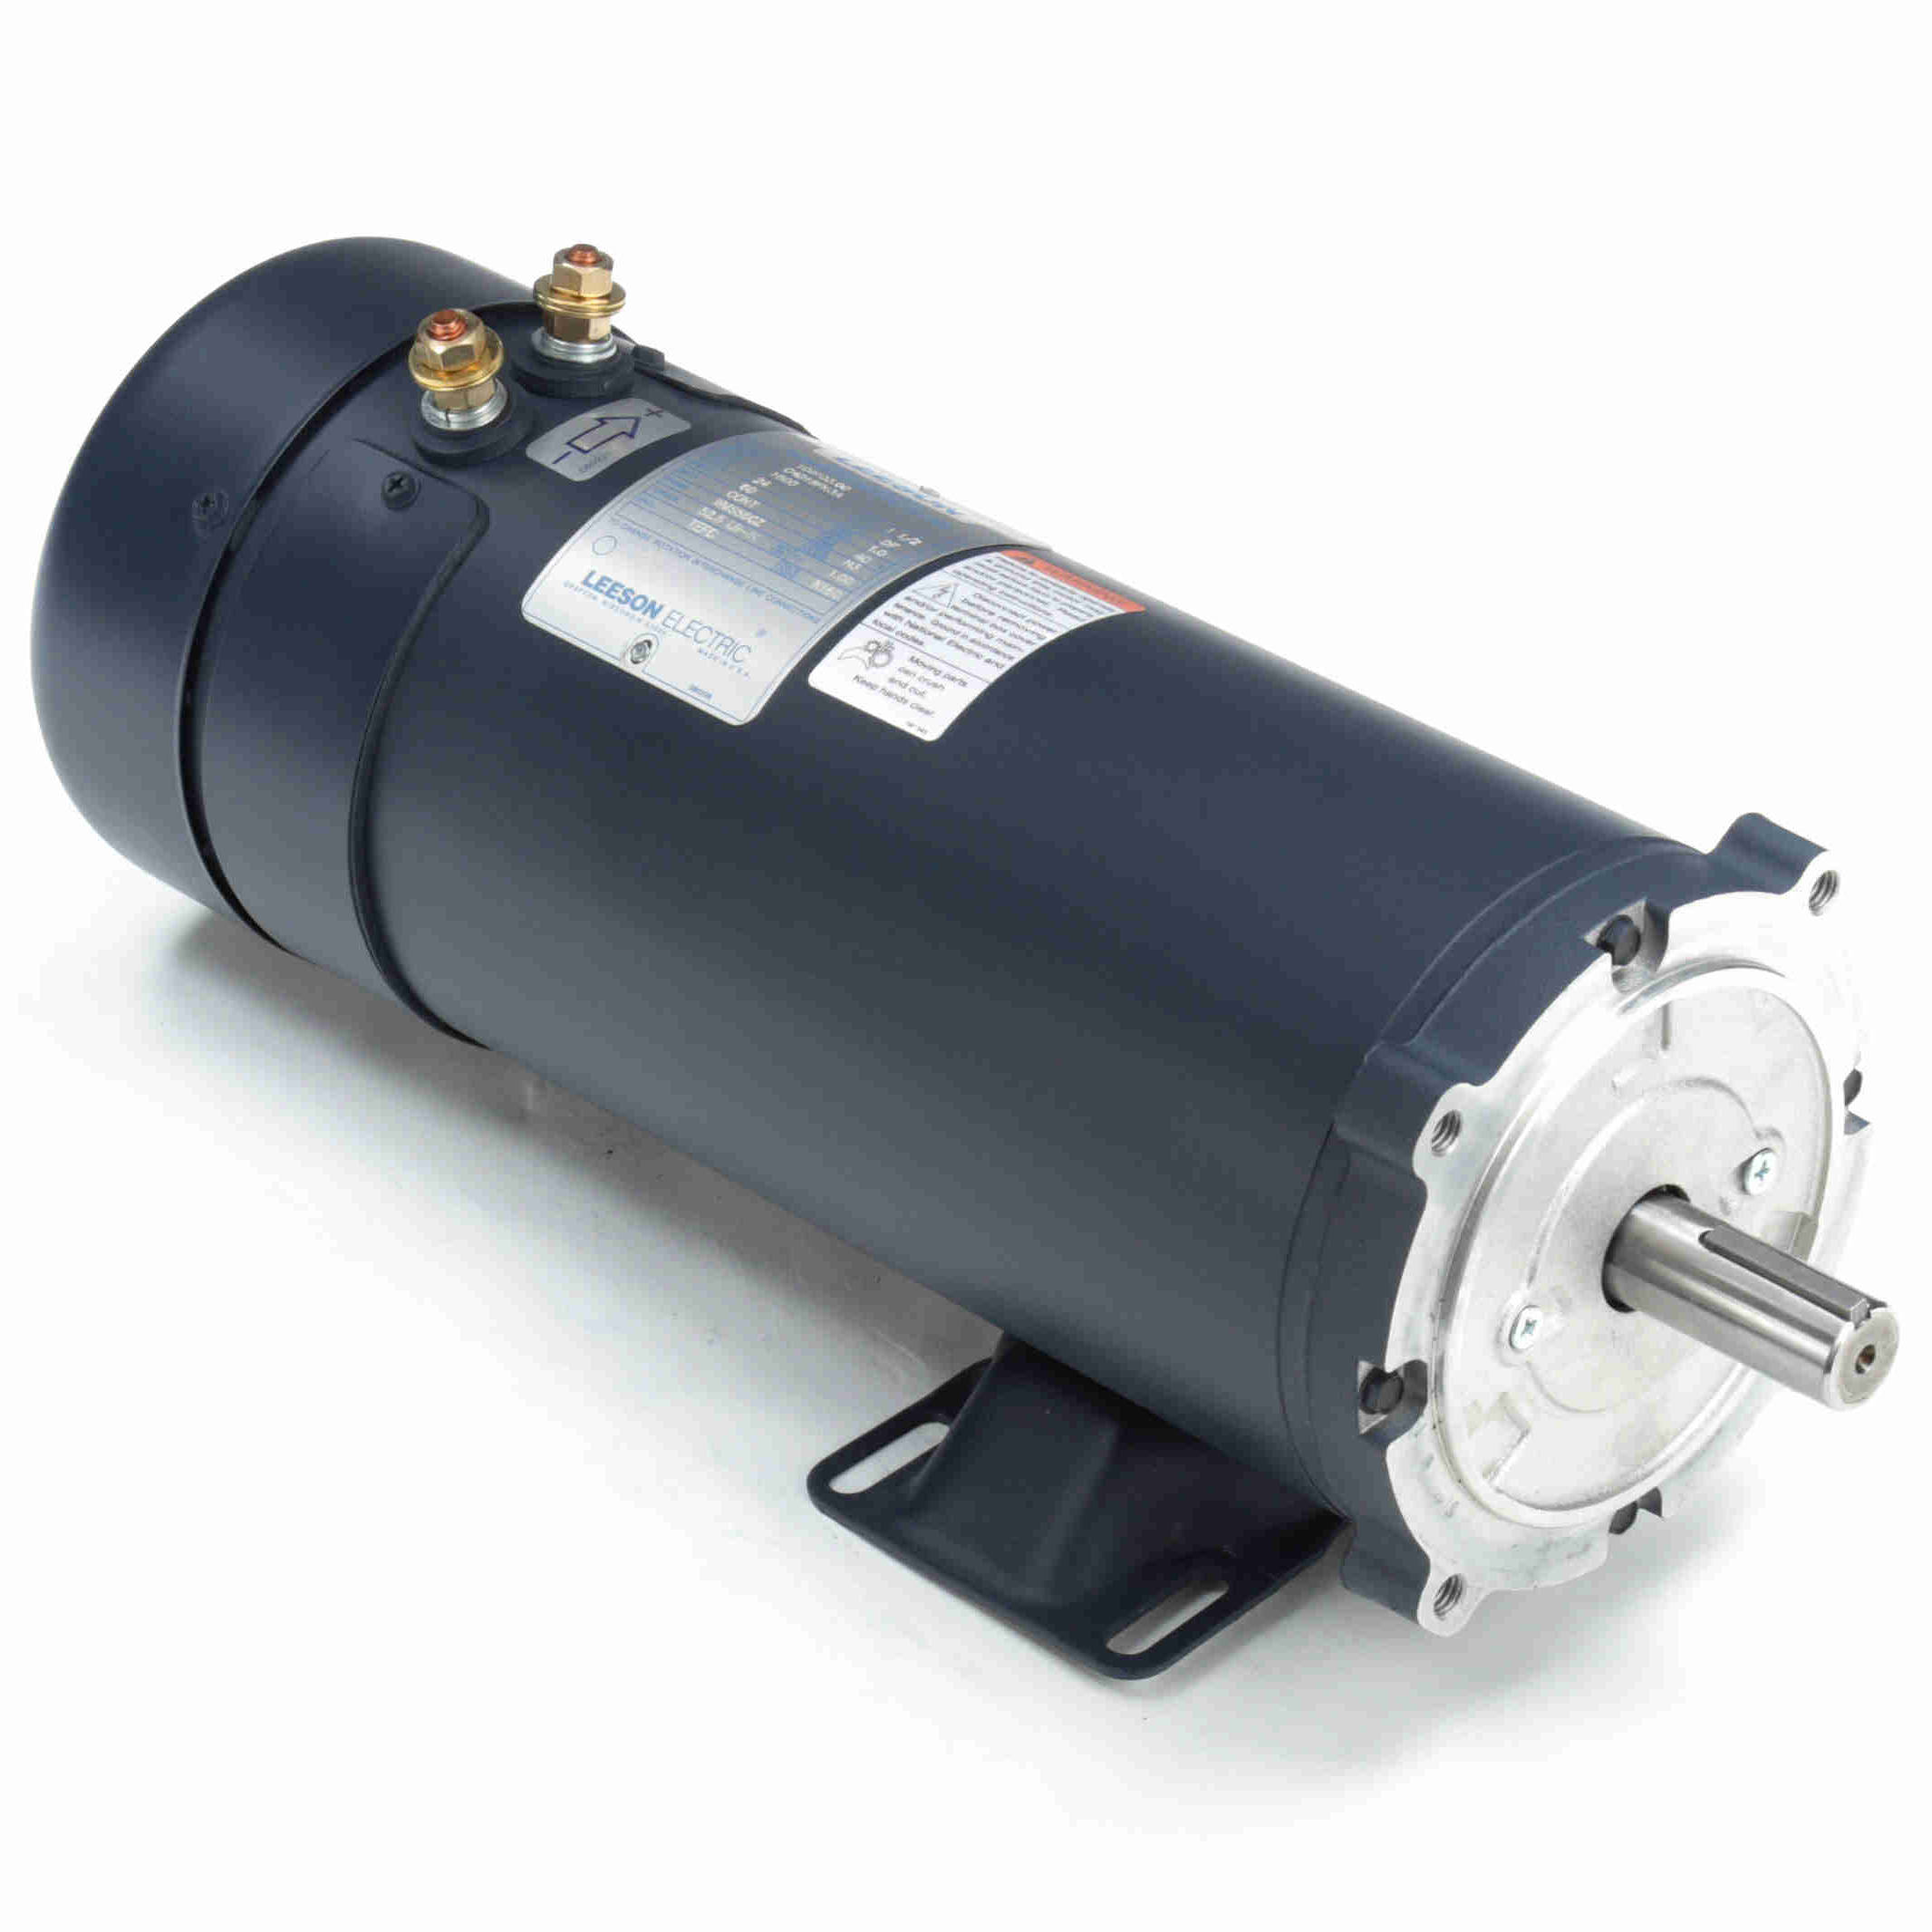 109103.00 Leeson 1.5HP Low Voltage DC Electric Motor, 1800RPM 1